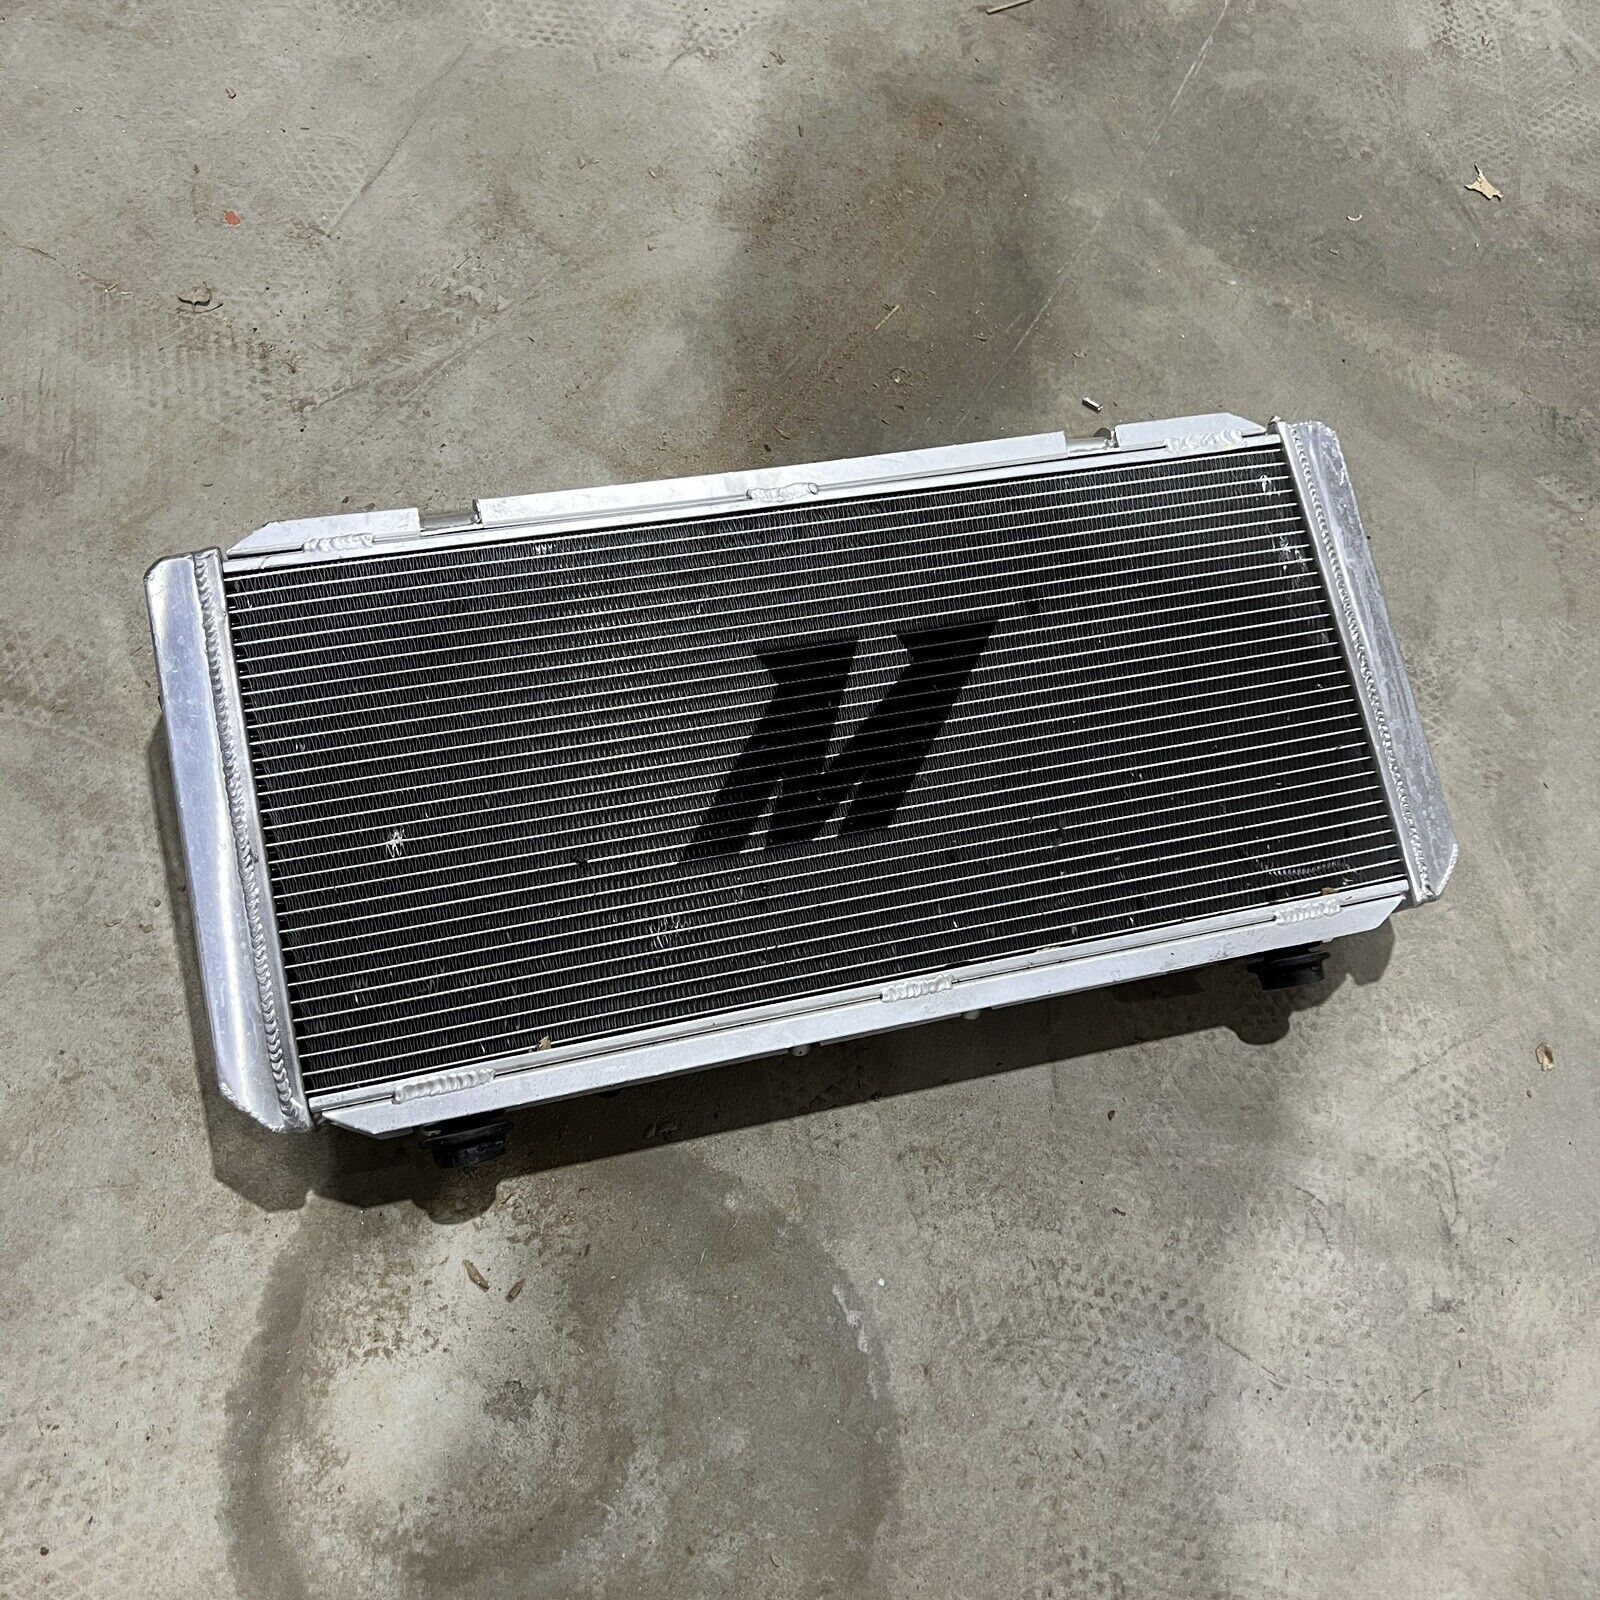 Mishimoto Radiator and Dual Electric Fans for 91-95 Toyota MR2 SW20 3SGTE